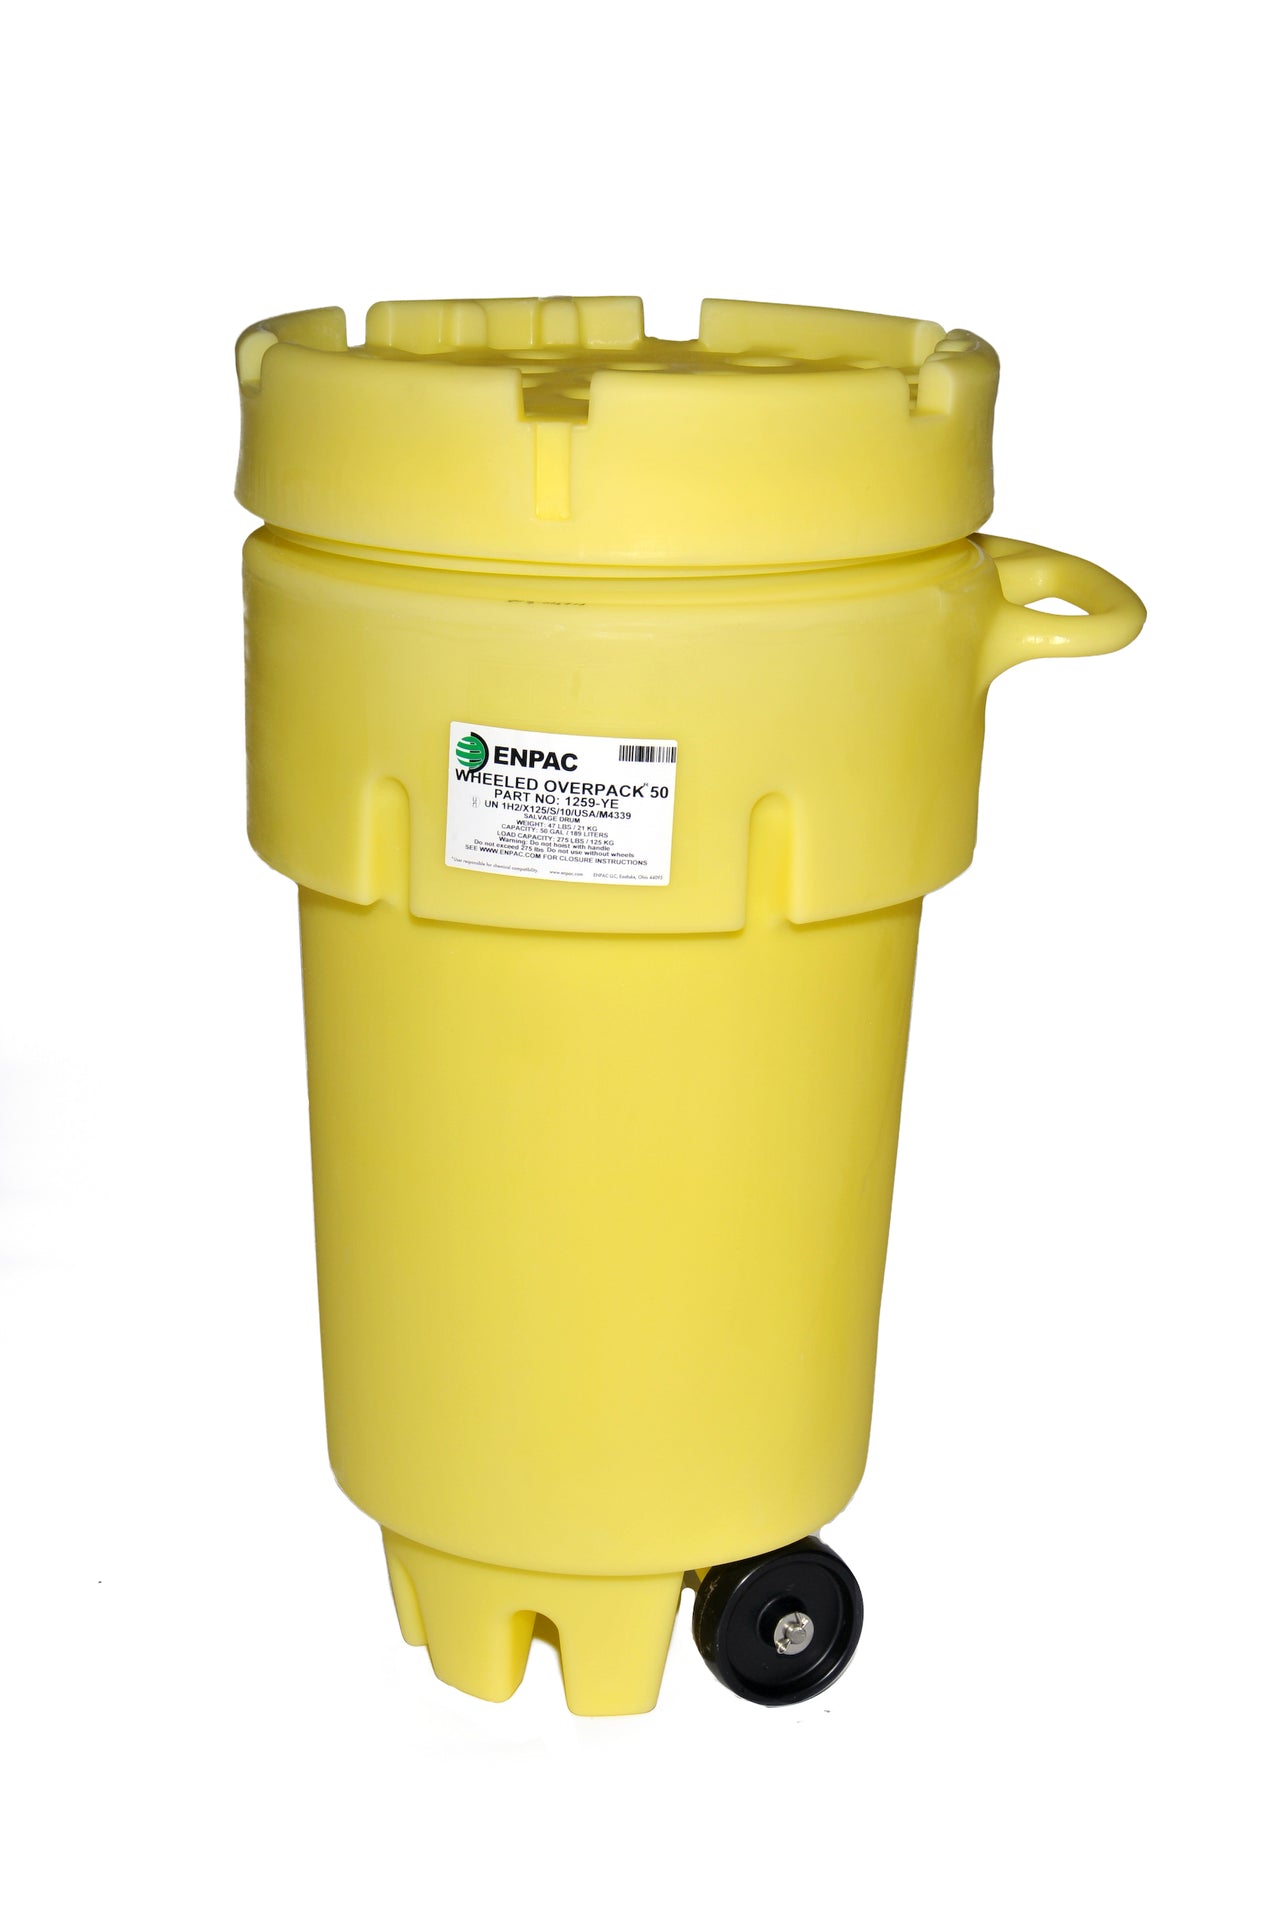 50-Gallon Wheeled Overpack Salvage Drum